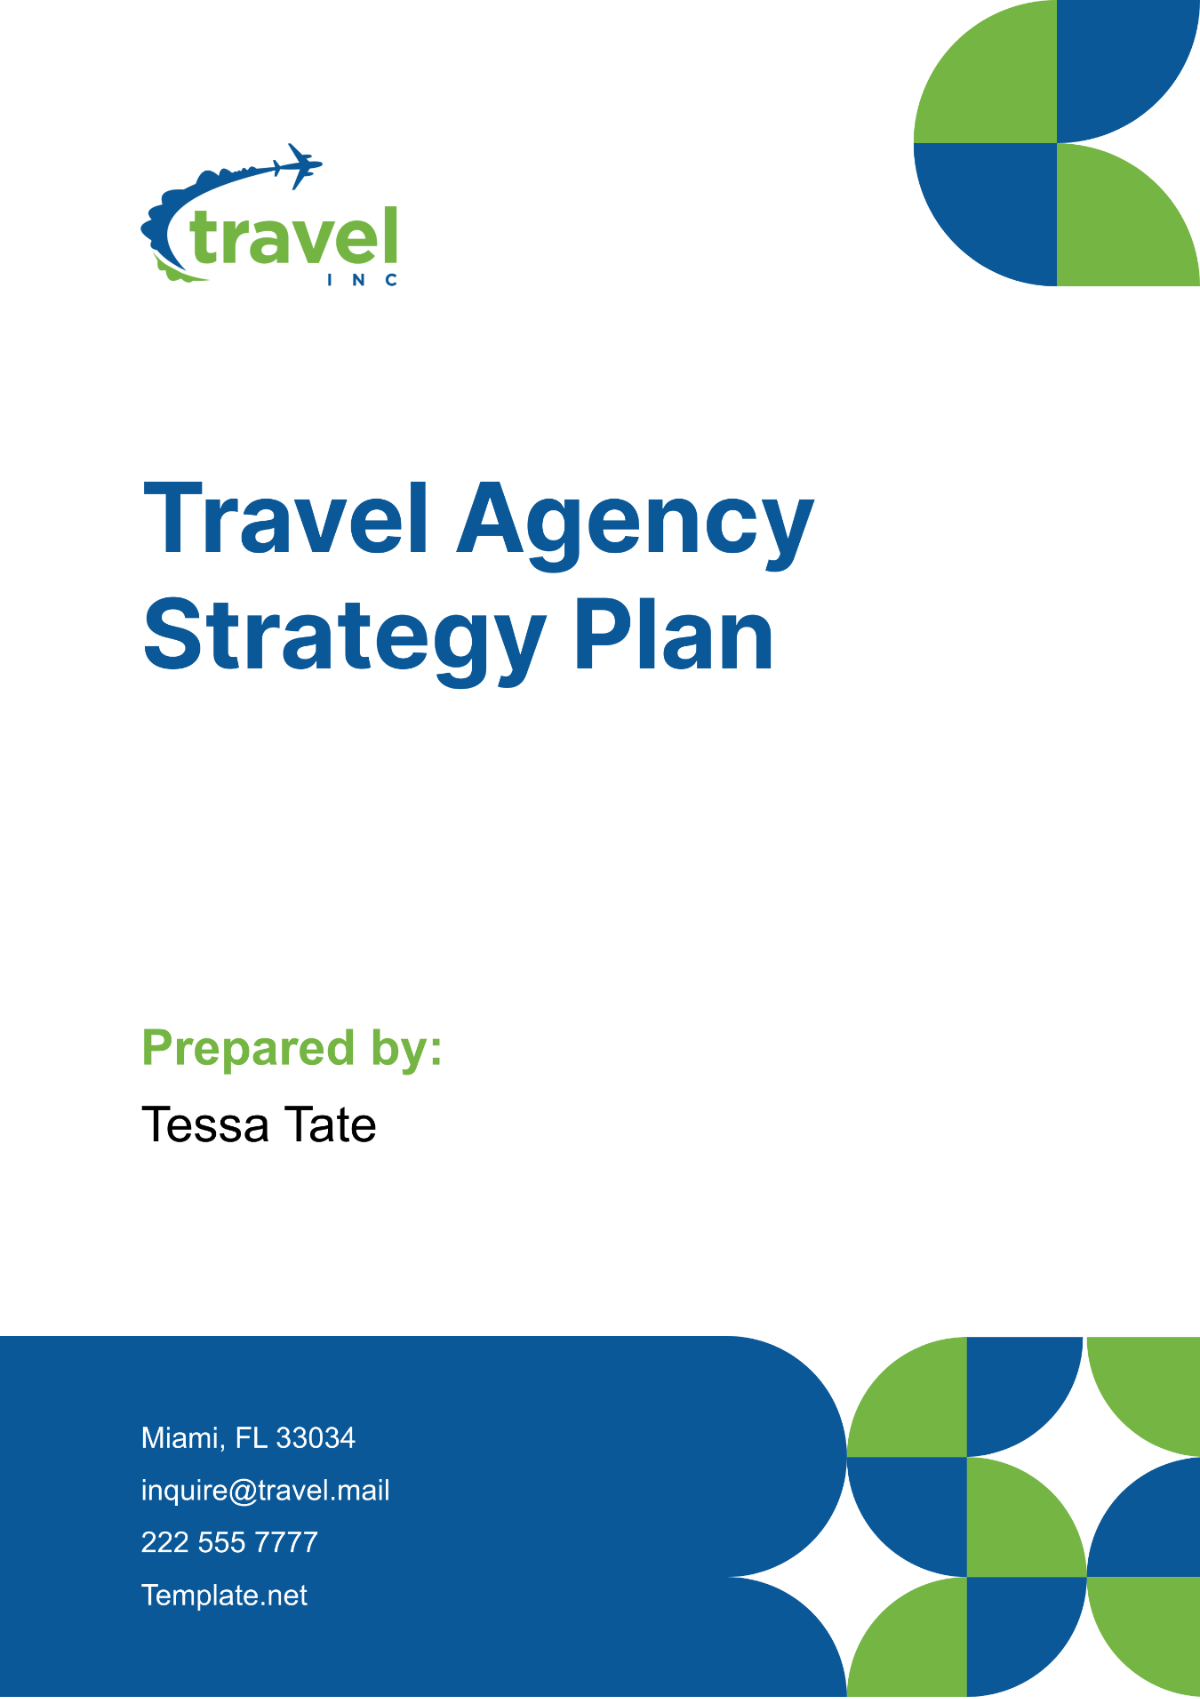 Travel Agency Strategy Plan Template